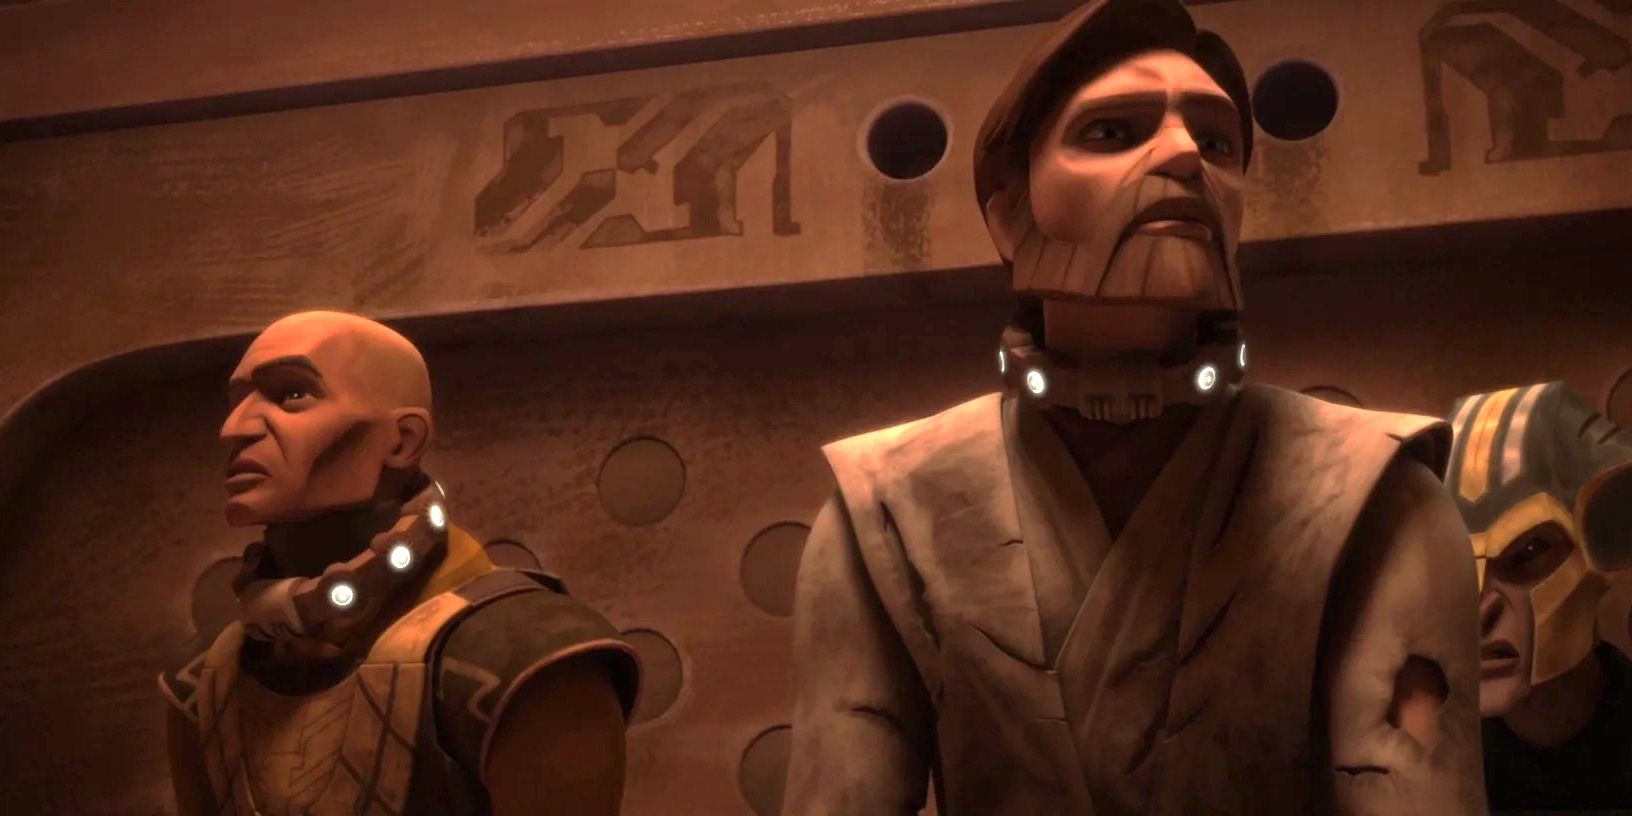 Obi-Wan and Captain Rex are trapped by the Zygerrians